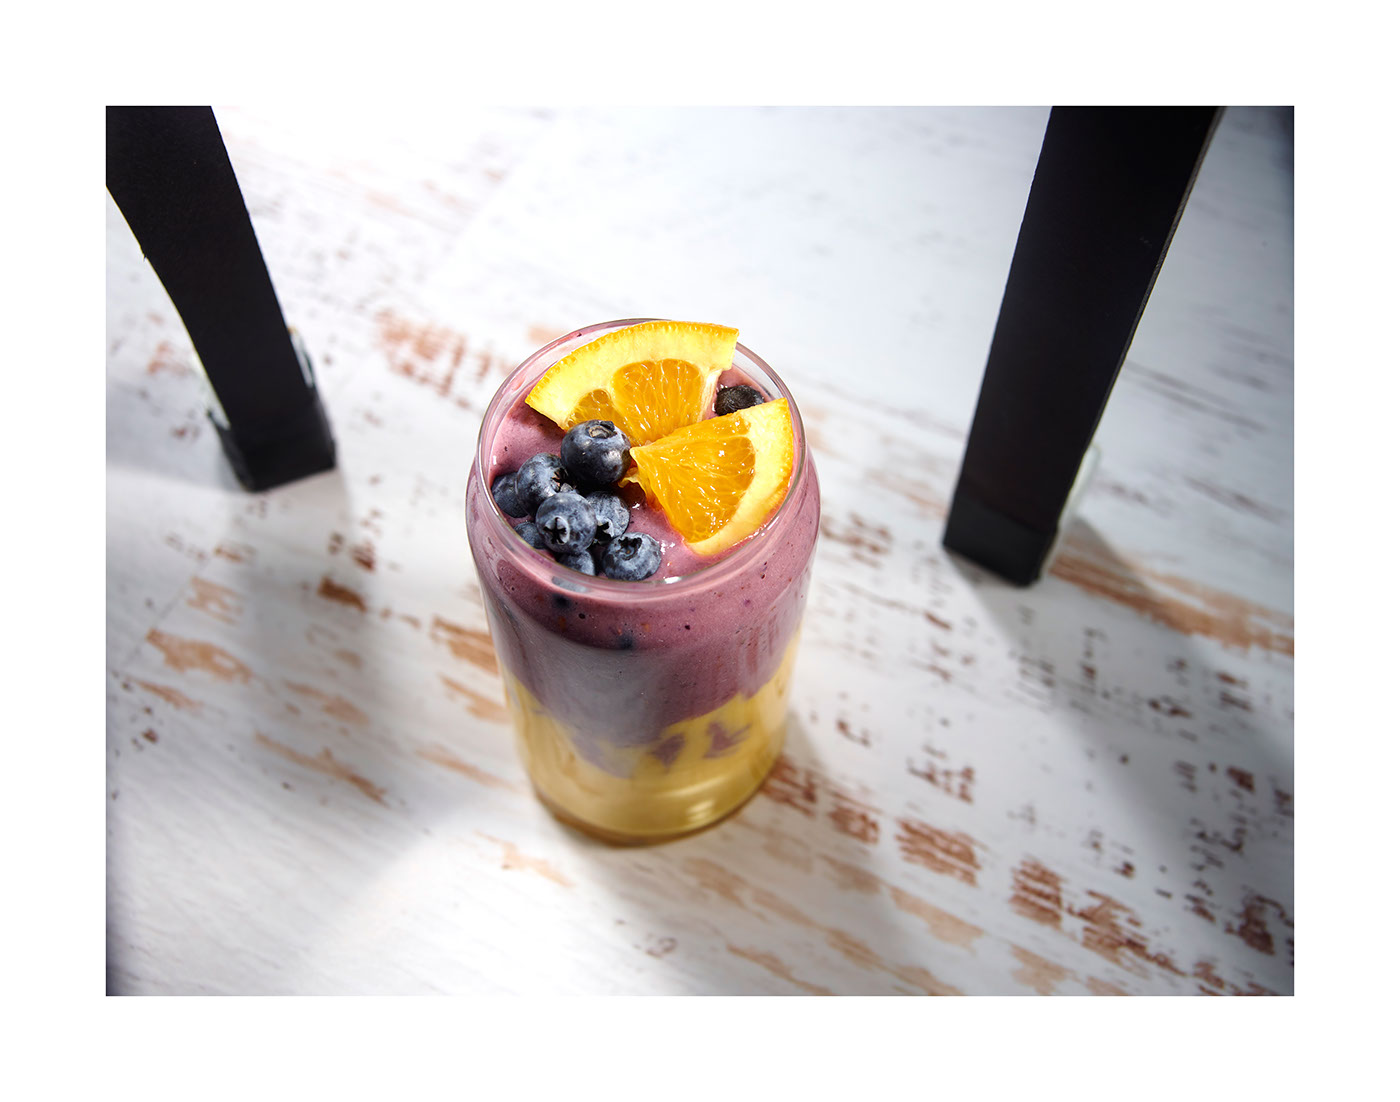 photoshop retouching  composition Fruit smoothies drinks Food  Summer Drinks